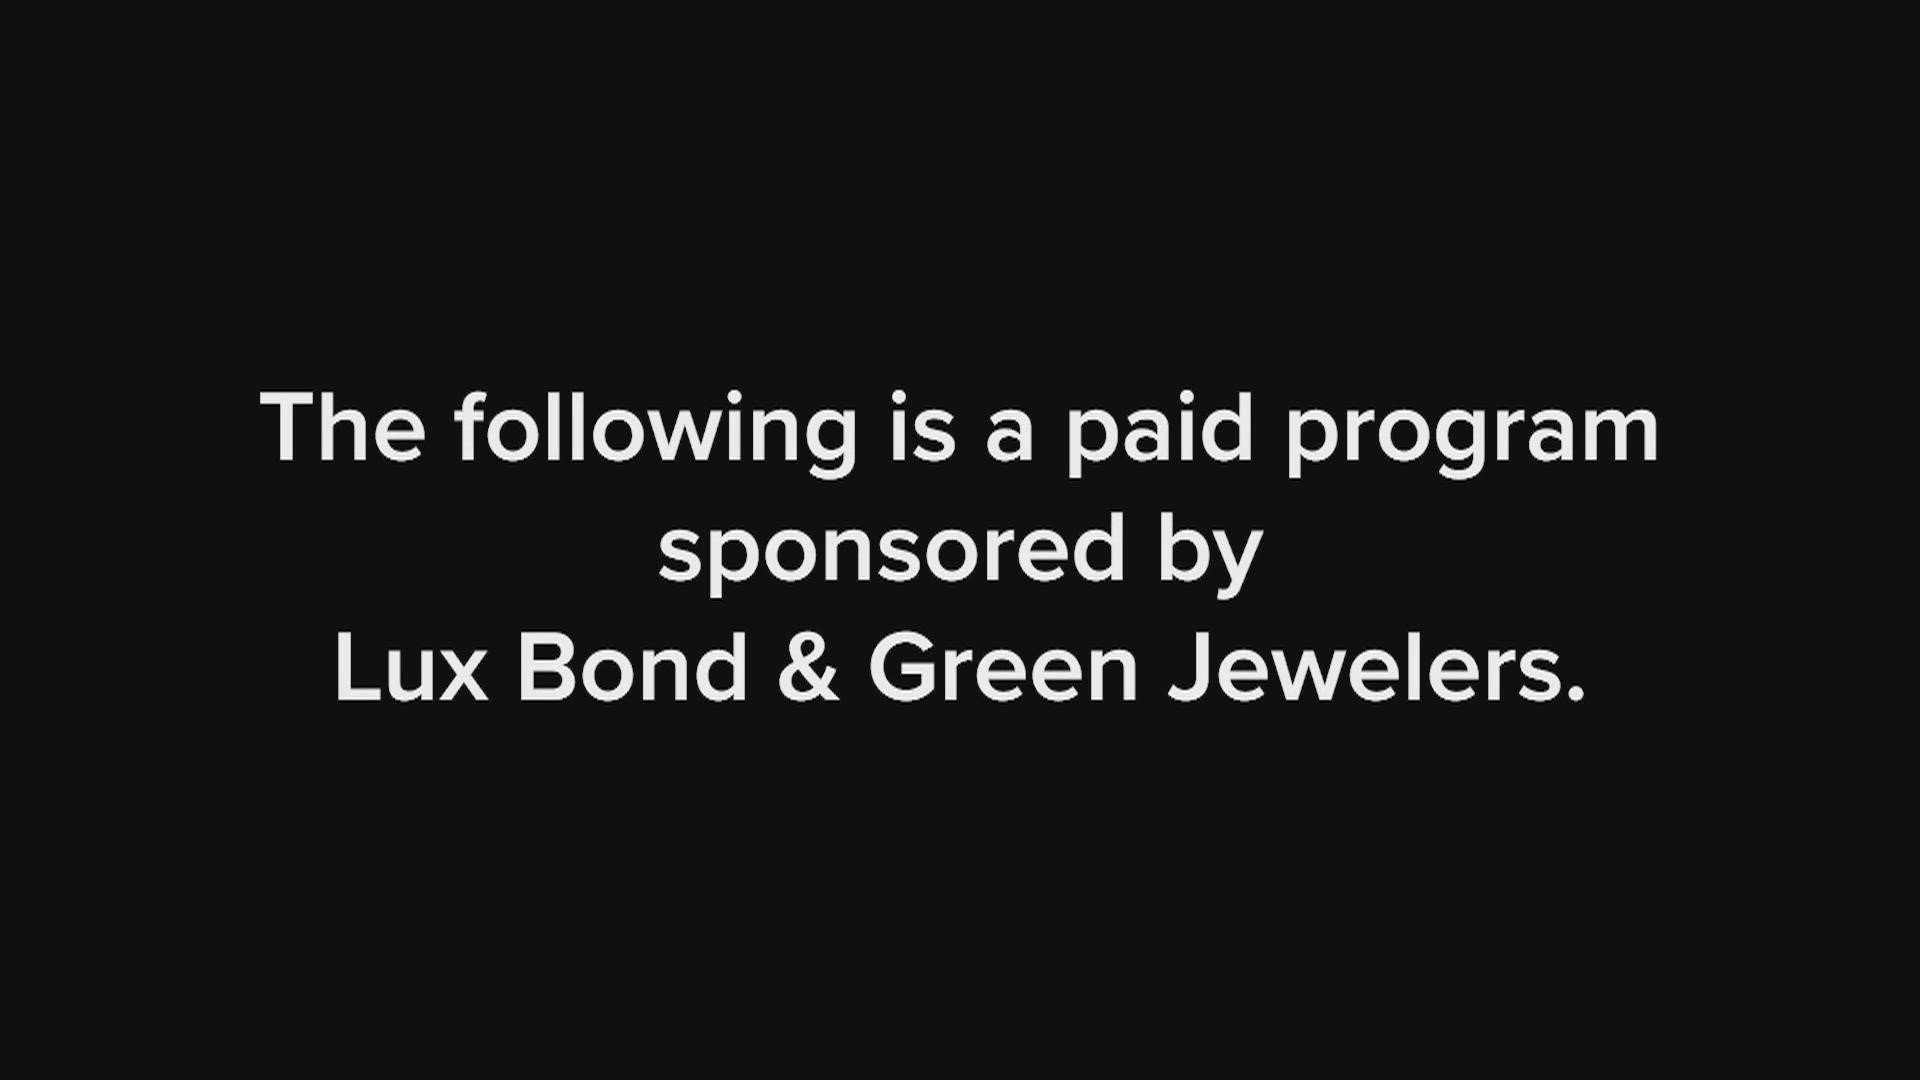 Get holiday gift ideas at Lux Bond & Green Jewelers and learn of a deep community partnership on Live.  Work. Play.